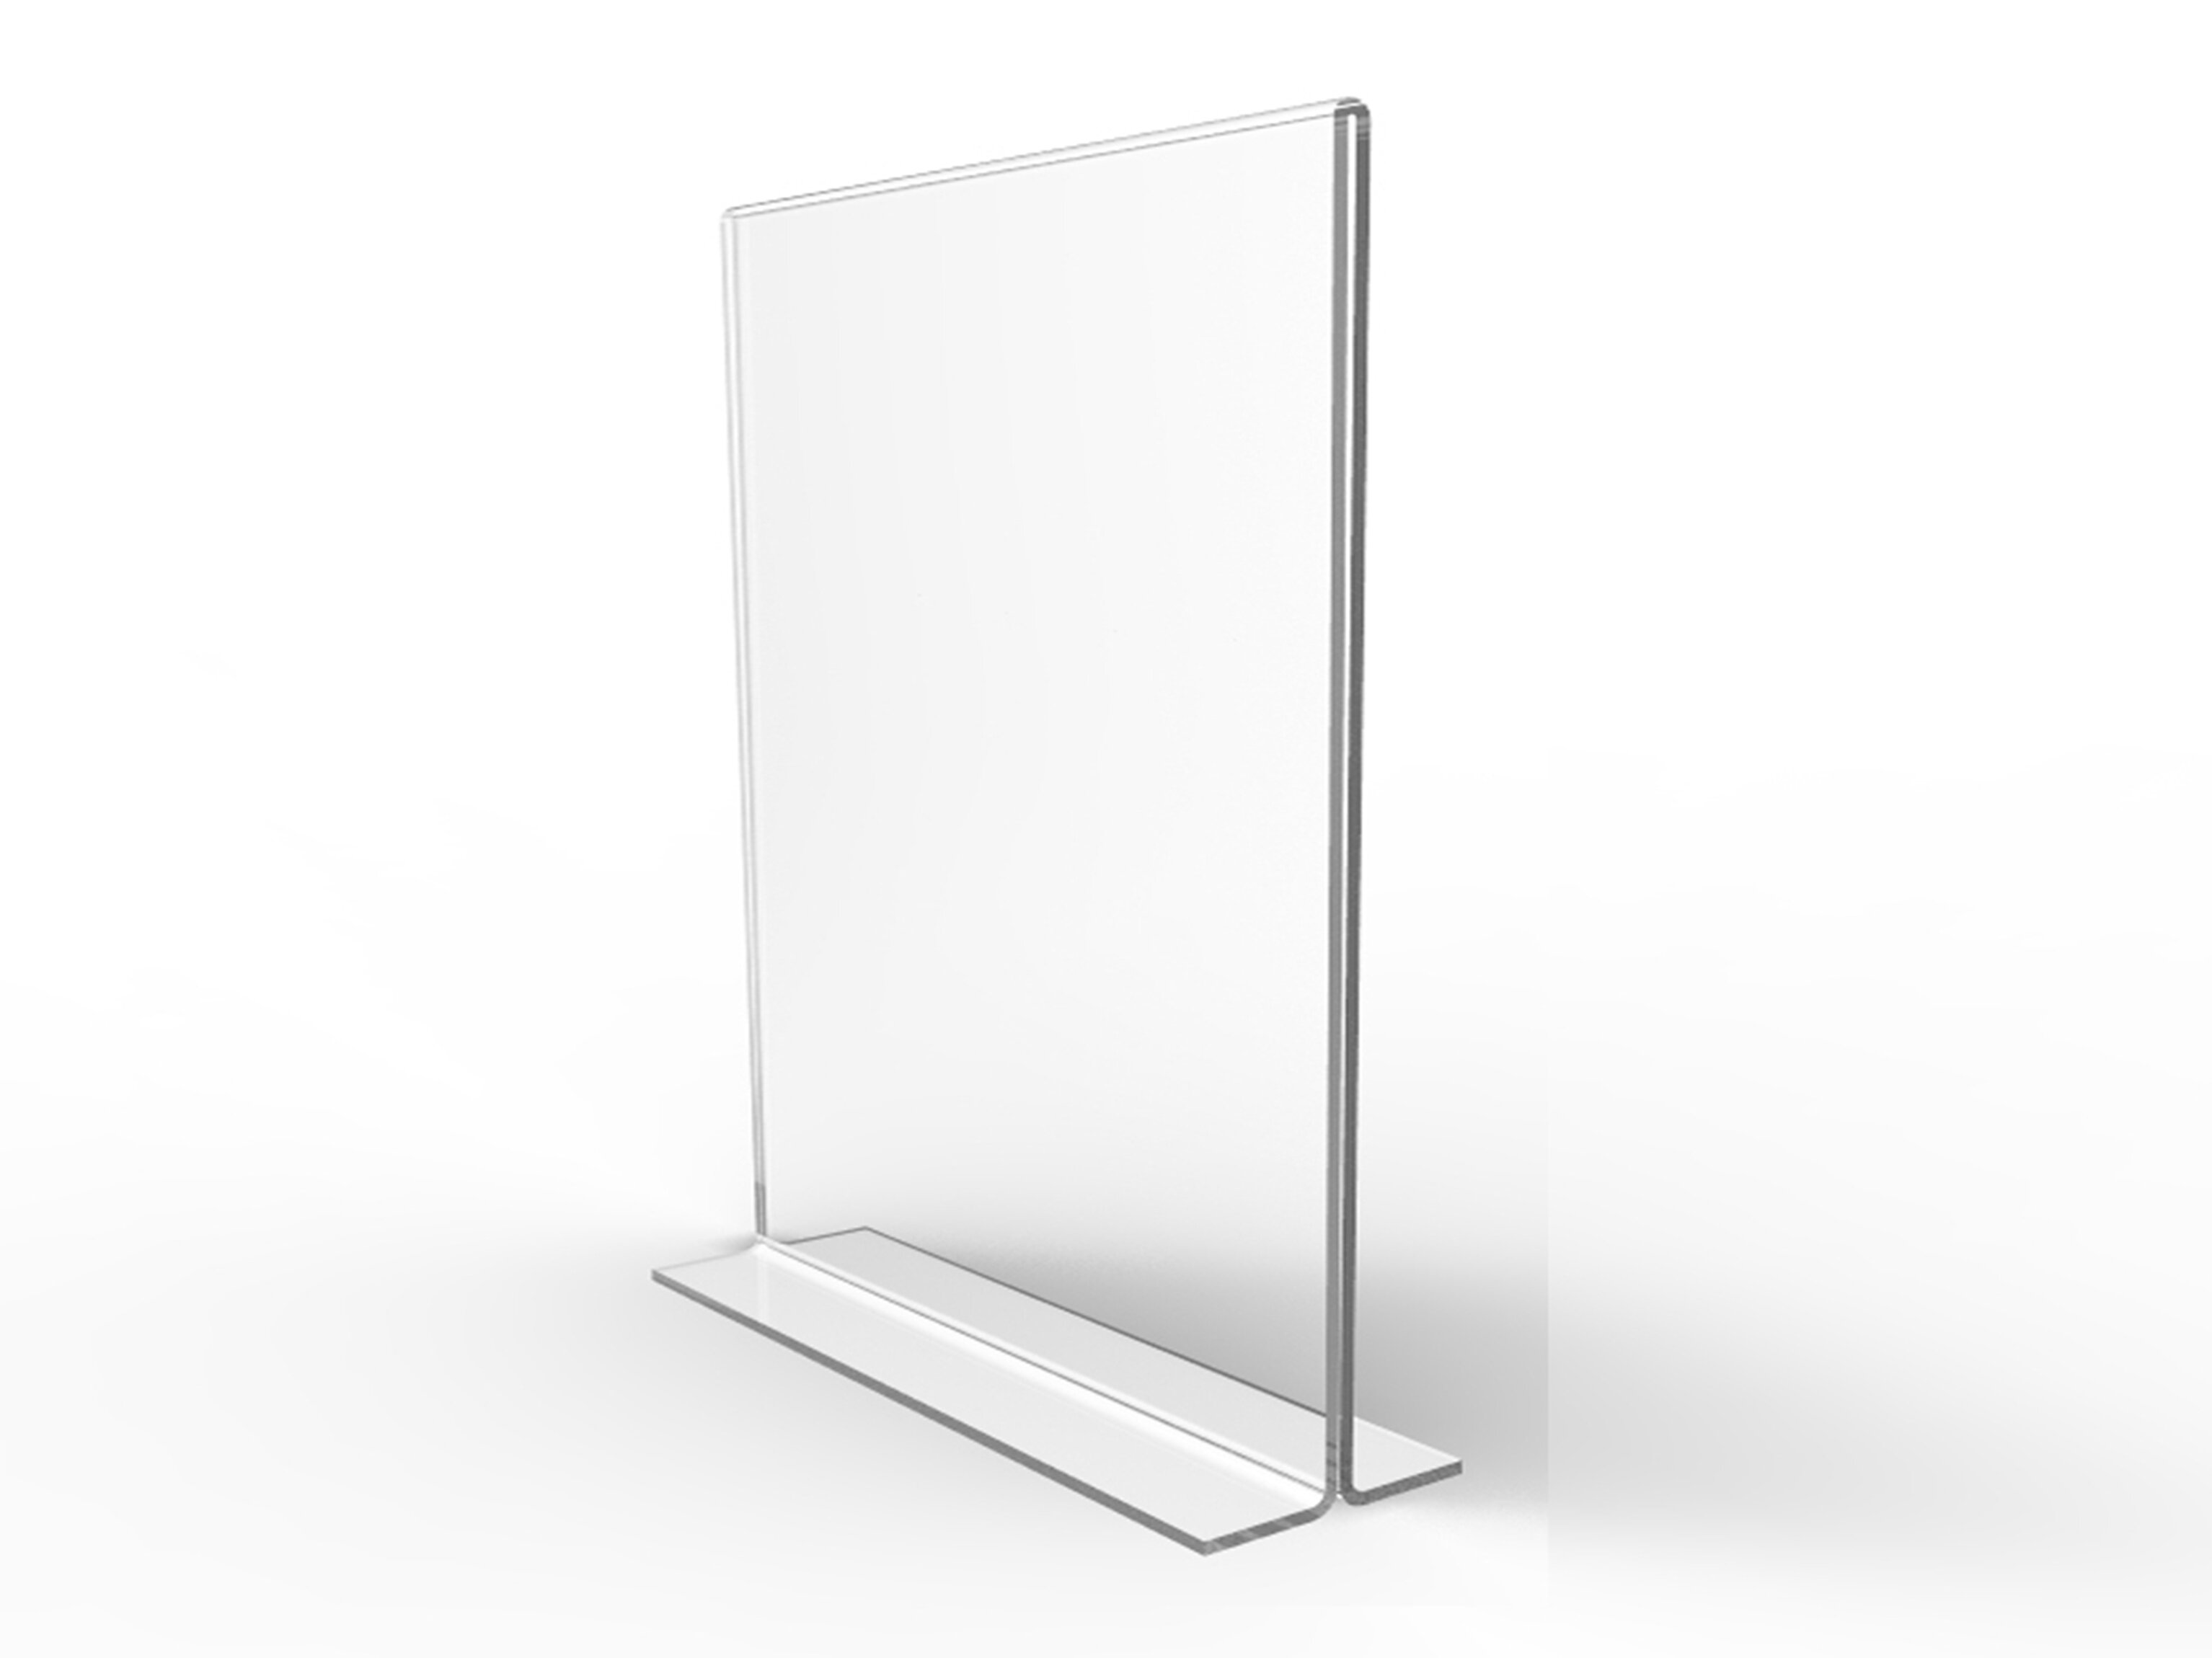 Bottom Insert 11193-2-8.5X11-6PK-FBA FixtureDisplays 6PK 8.5 x 11 Clear Acrylic Sign Holder for Tabletops Vertical Table Tent Frame Photo Sign Menu